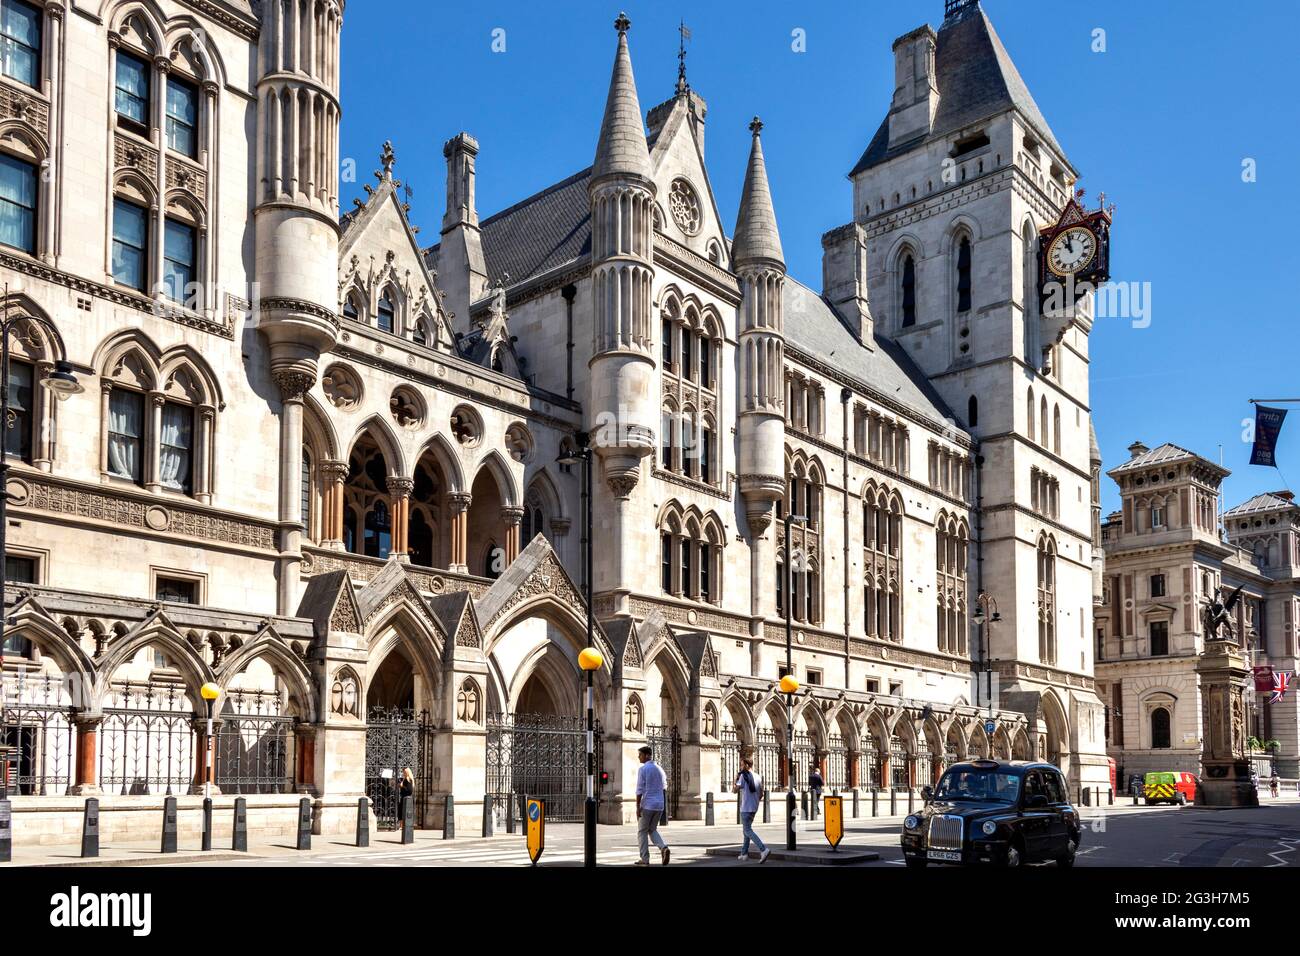 LONDON ENGLAND ROYAL COURTS OF JUSTICE OR LAW COURTS THE STRAND THE BUILDING AND CLOCK TOWER Stock Photo